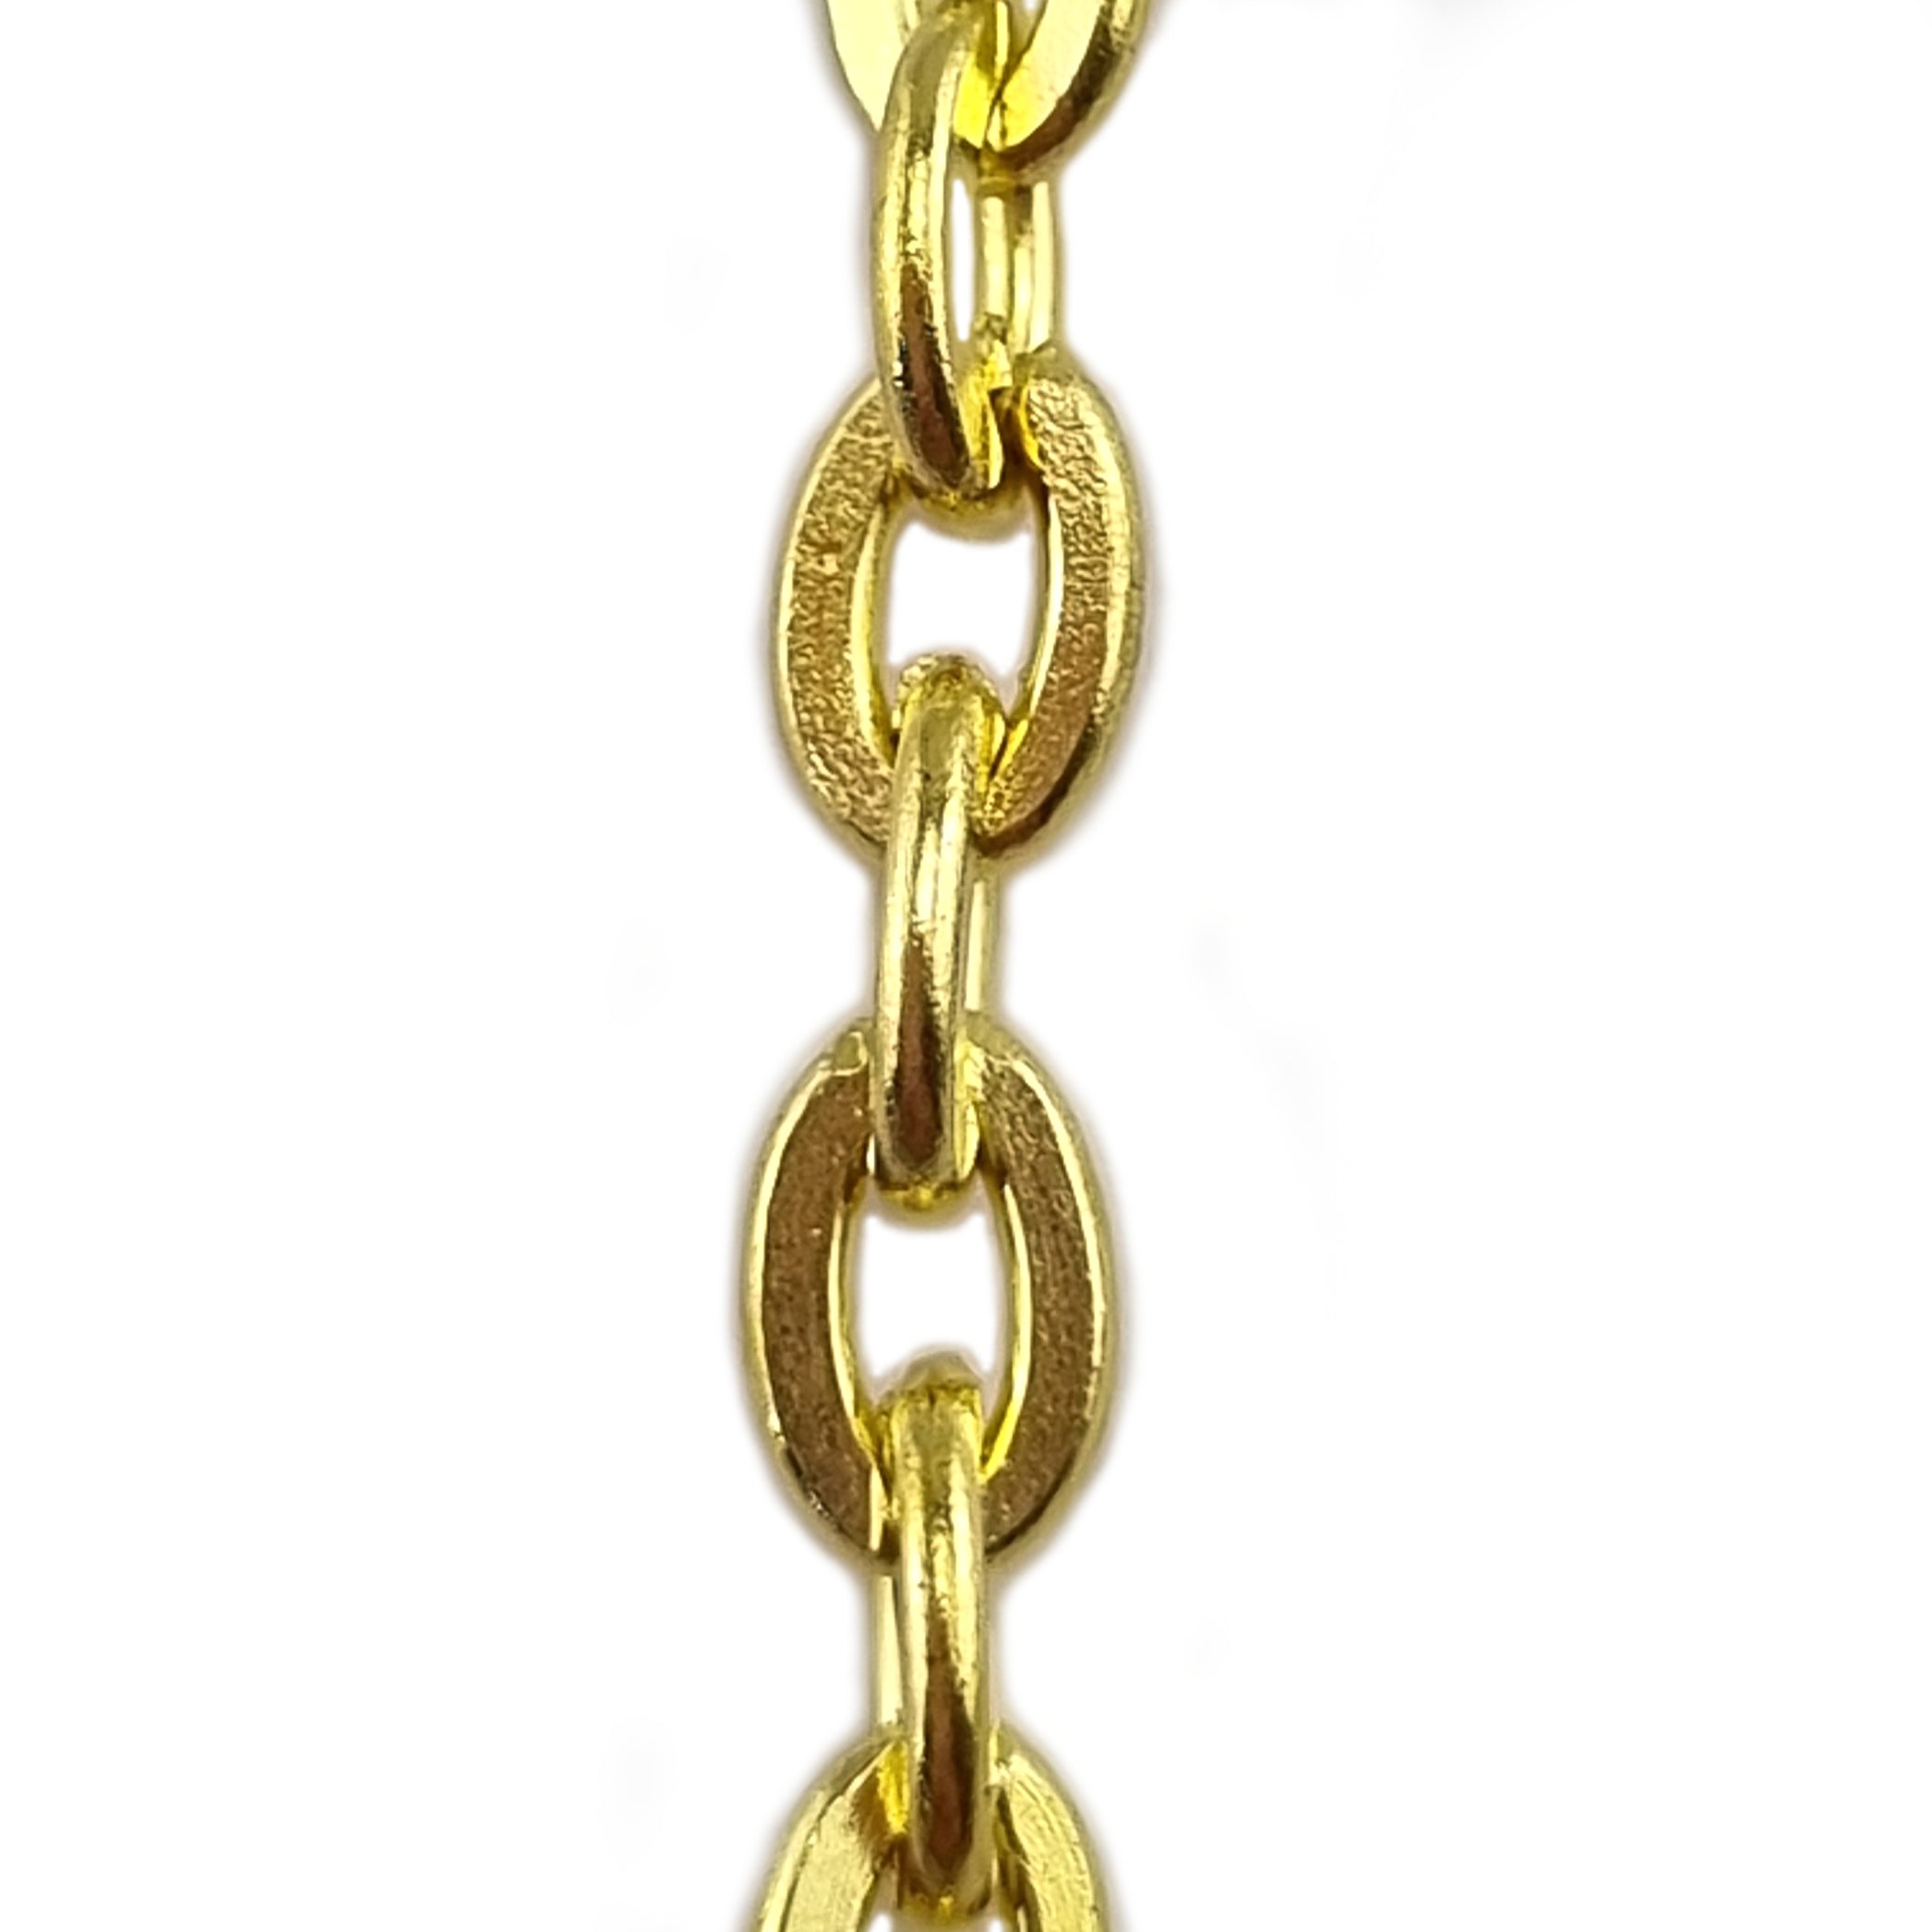 Hammered Trace Chain in a Gold Plated Finish. Various sizes available. Jewellery Chain, Australia wide shipping. Shop chain.com.au